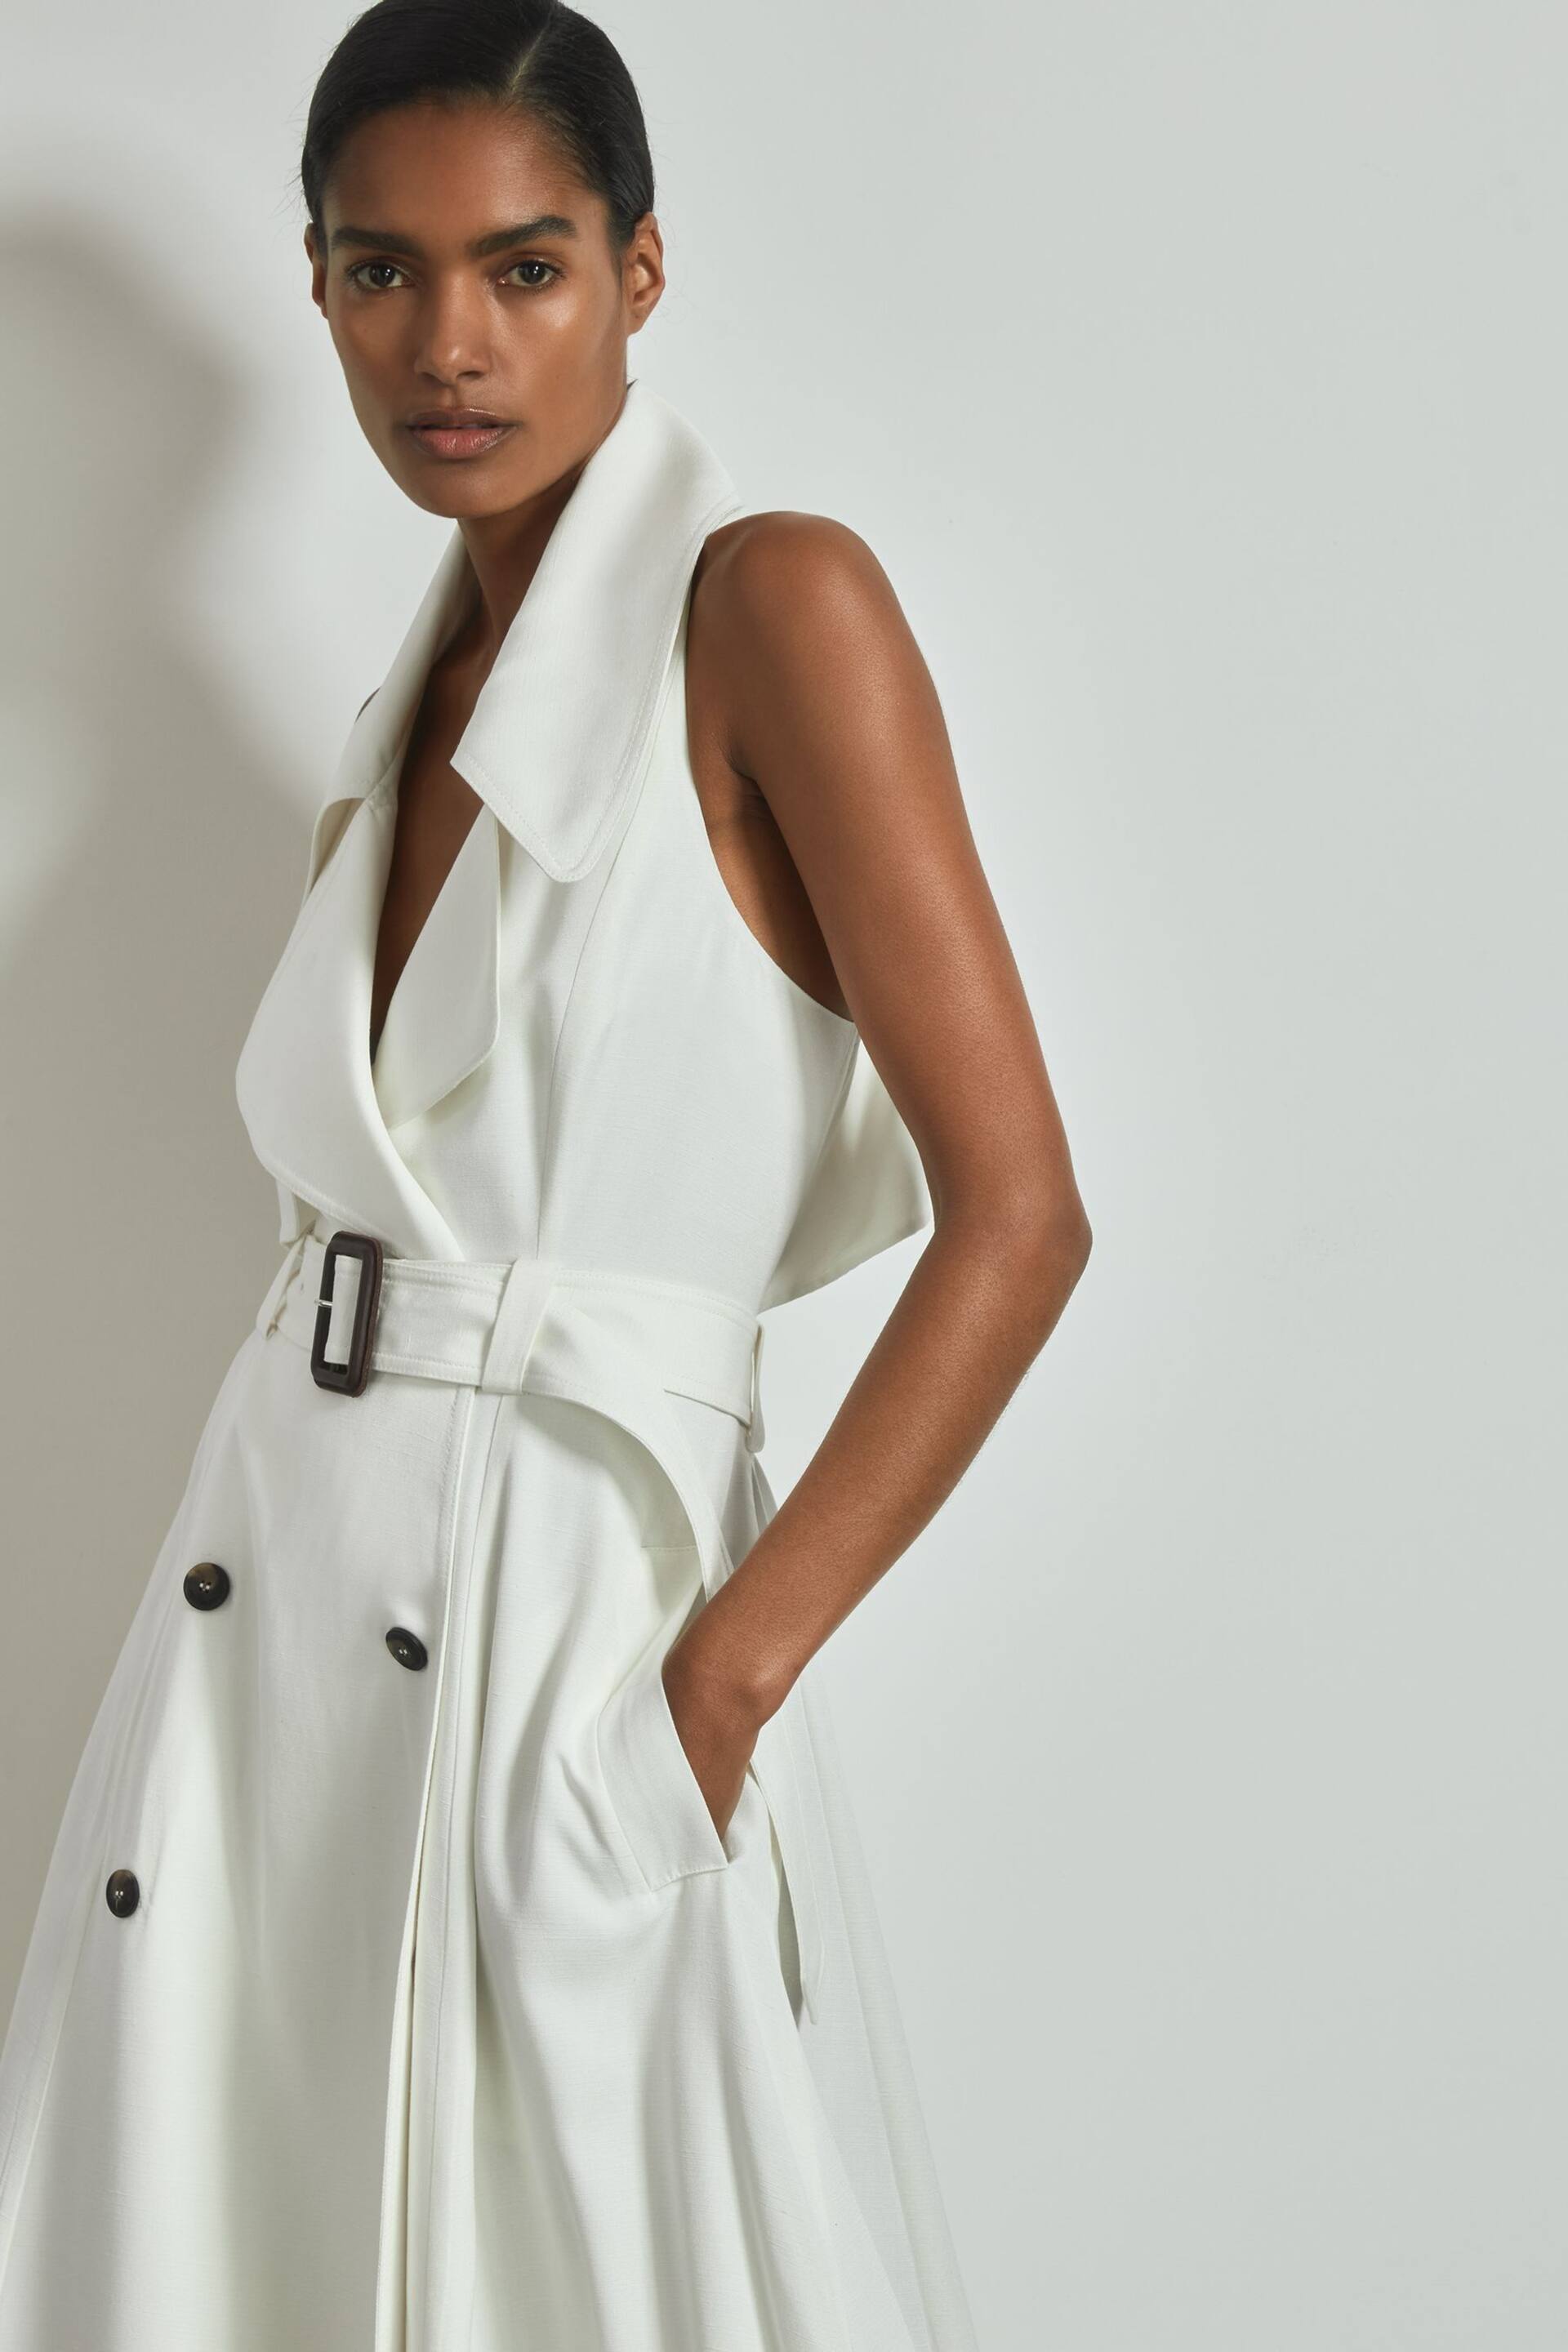 Atelier Italian Textured Wrap Dress with Silk - Image 1 of 6